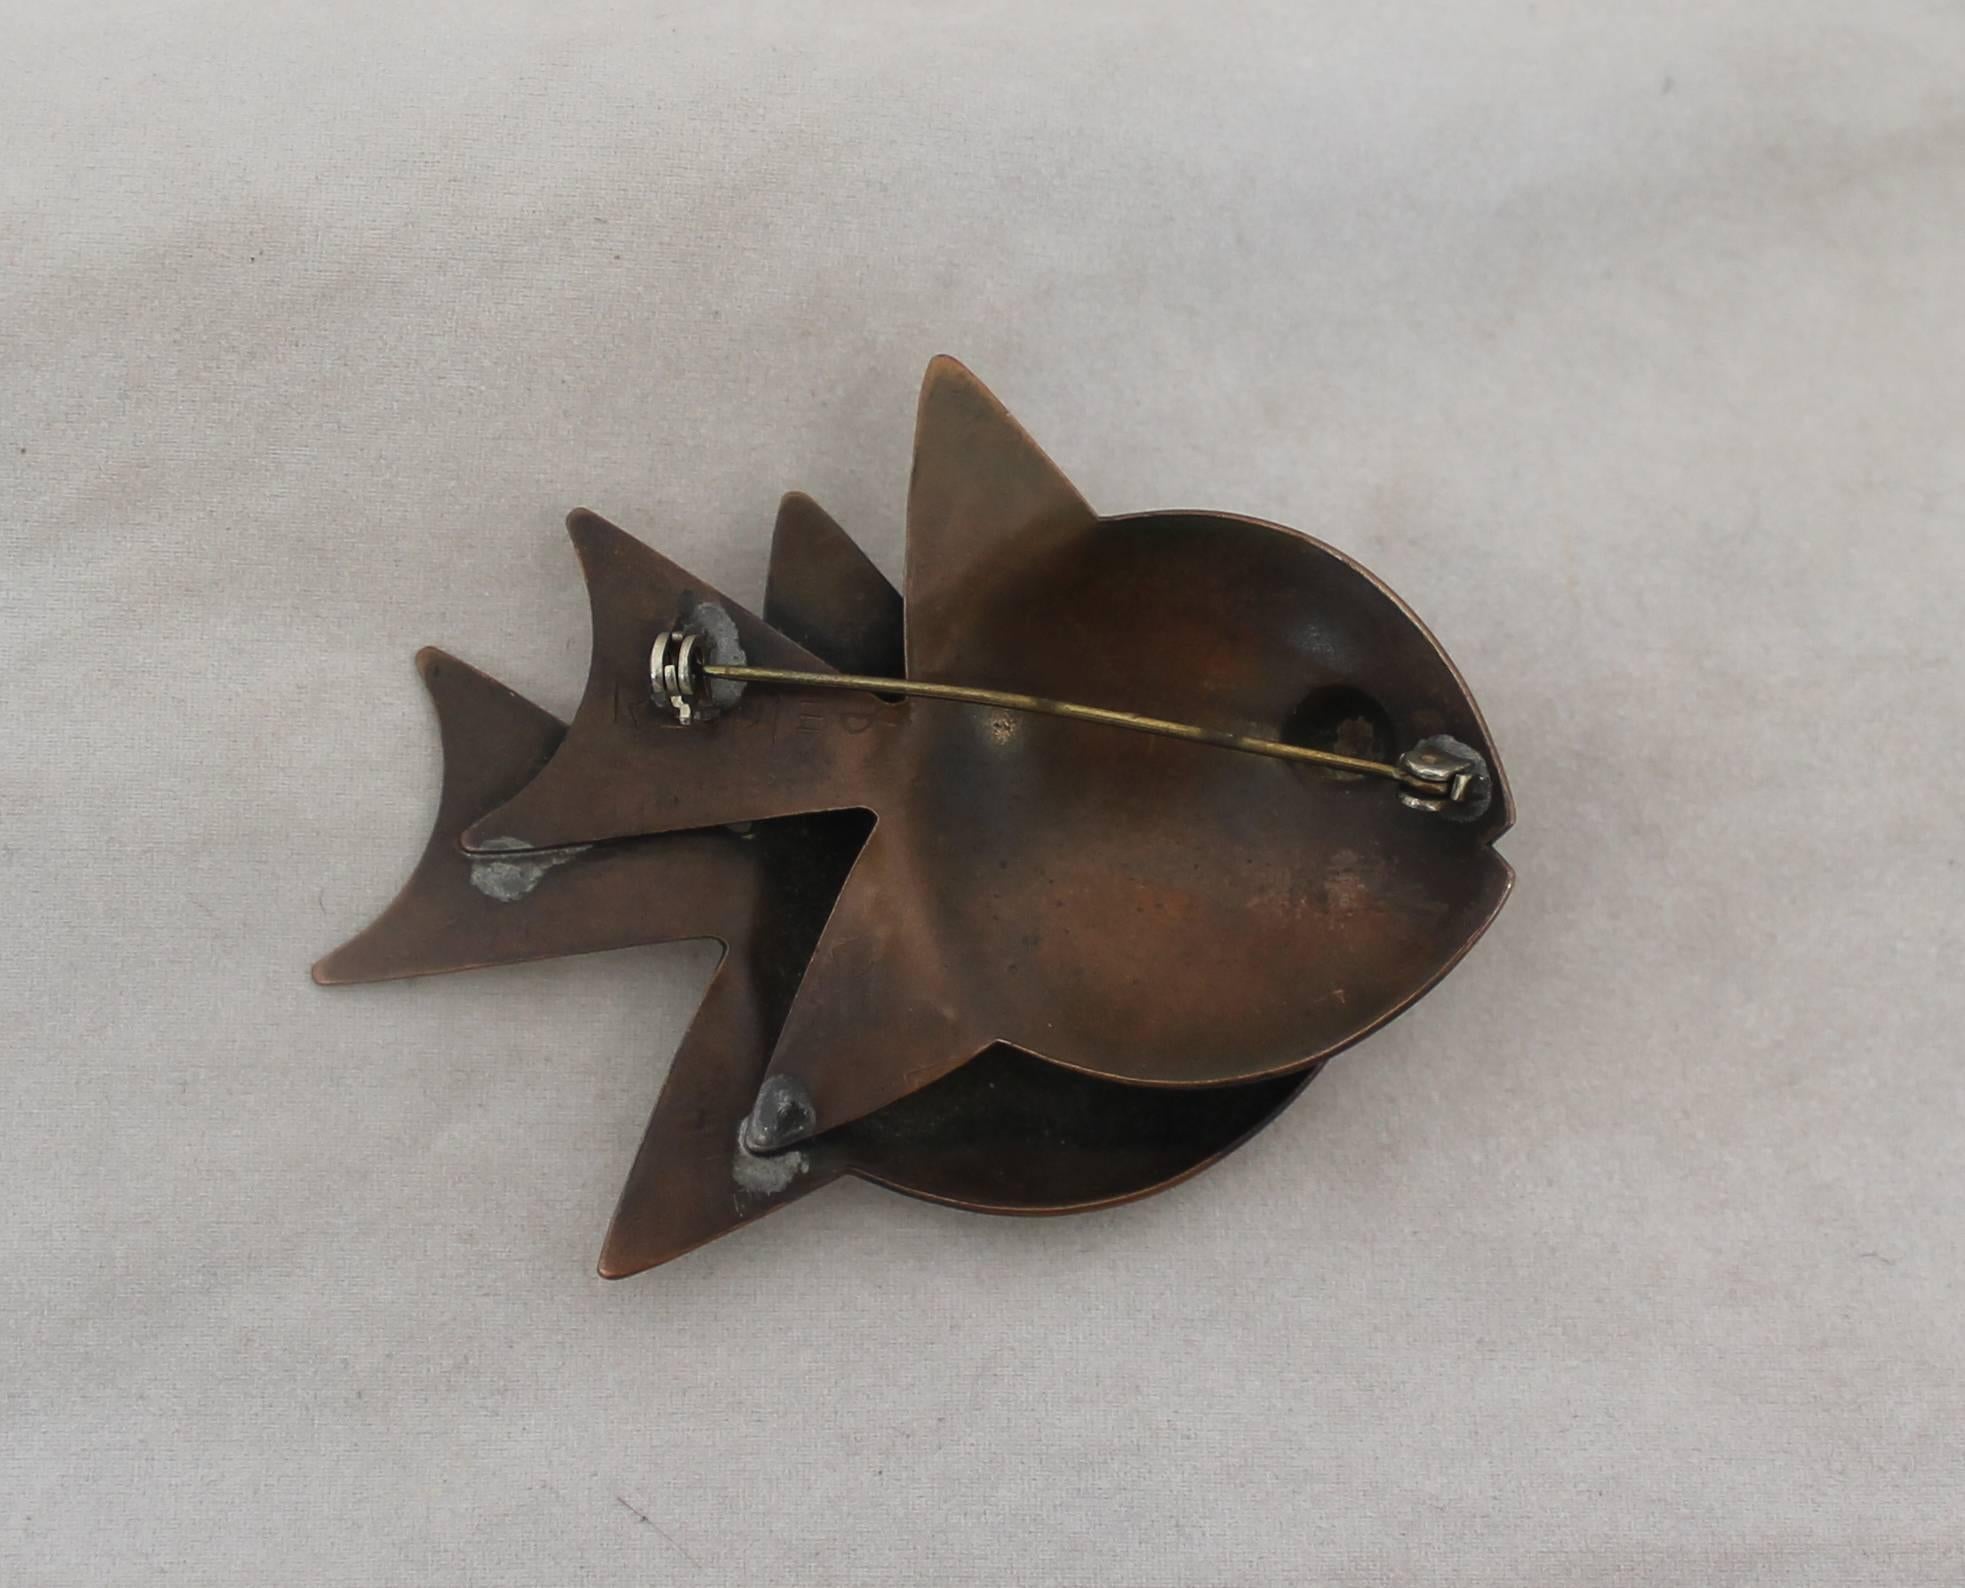 Rebajes Copper Double Fish Brooch - Circa 1950's.  This vintage brooch is in very good vintage condition with only some wear consistent with its age.  It features a 